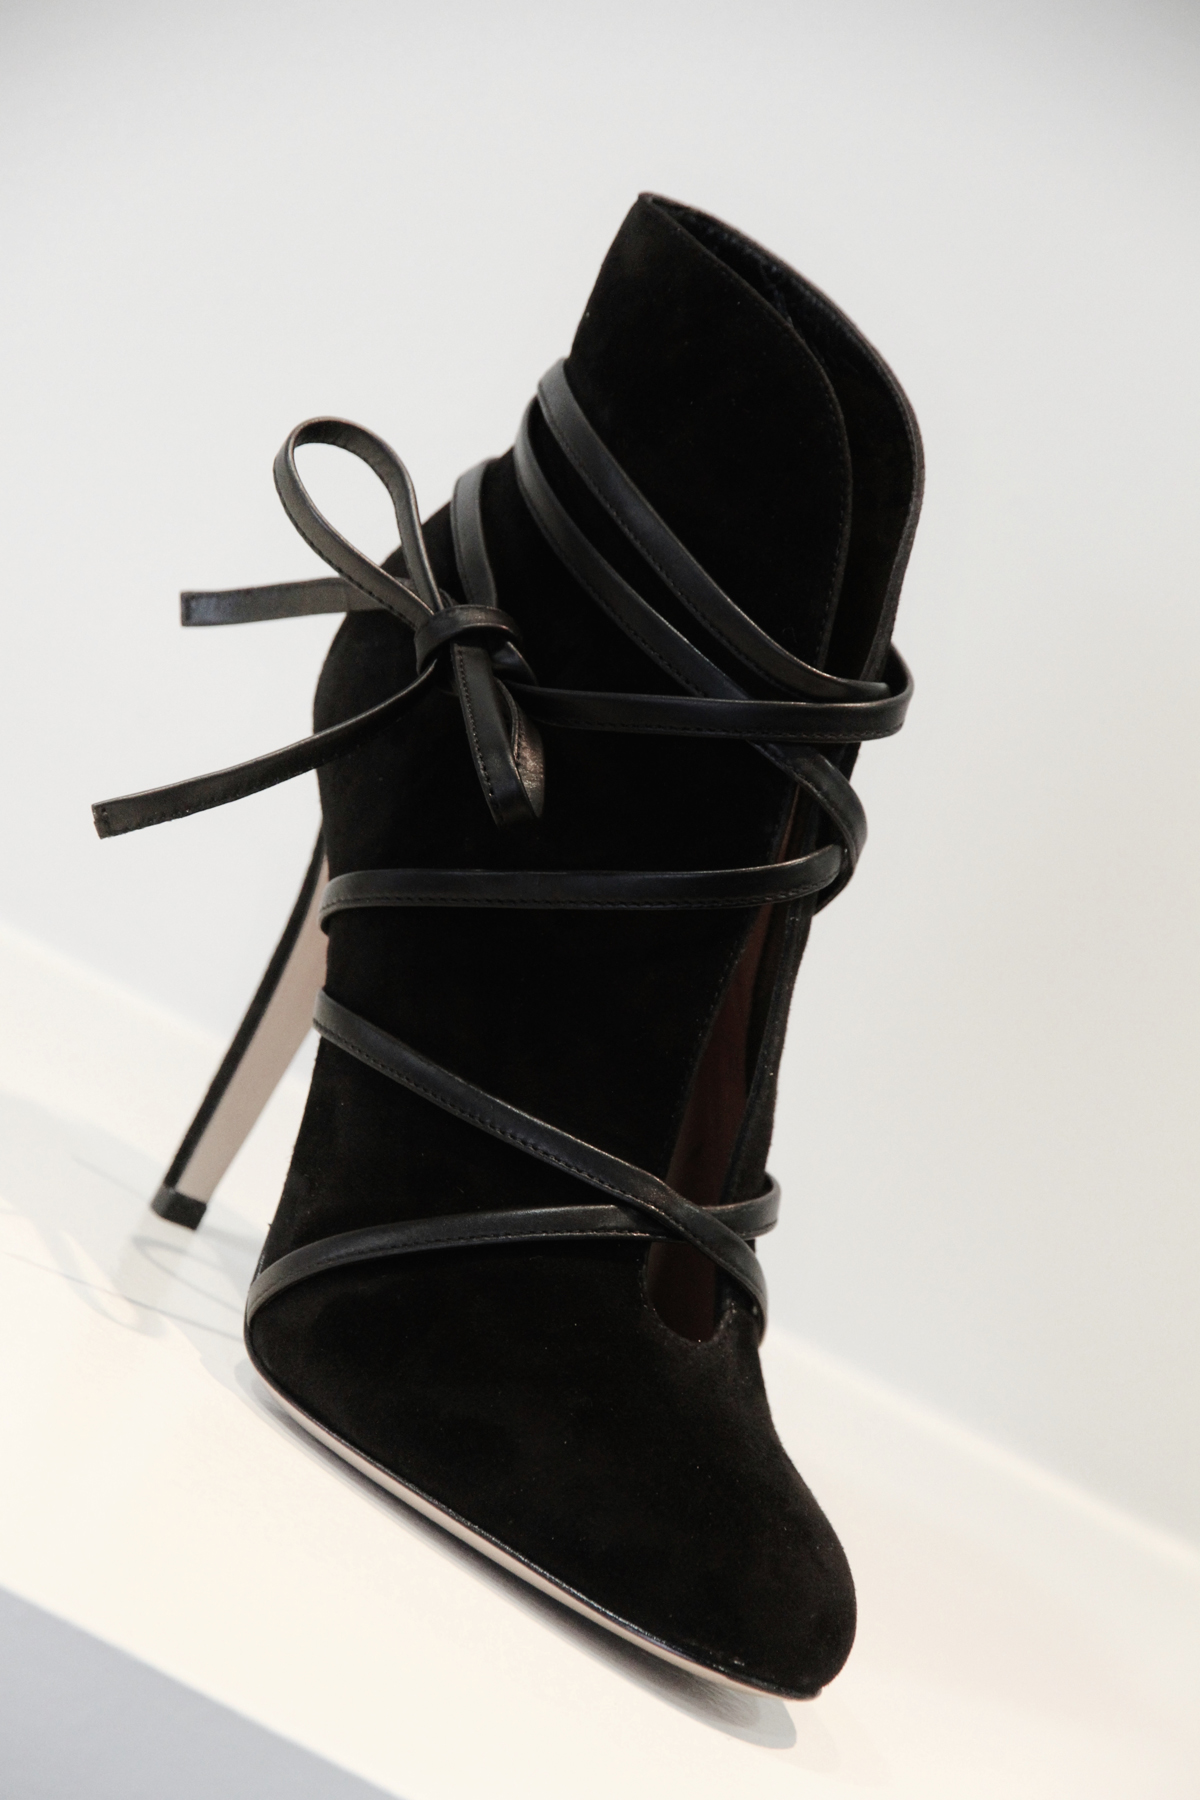 boot-gianvito-rossi-lace-up-2015-2016